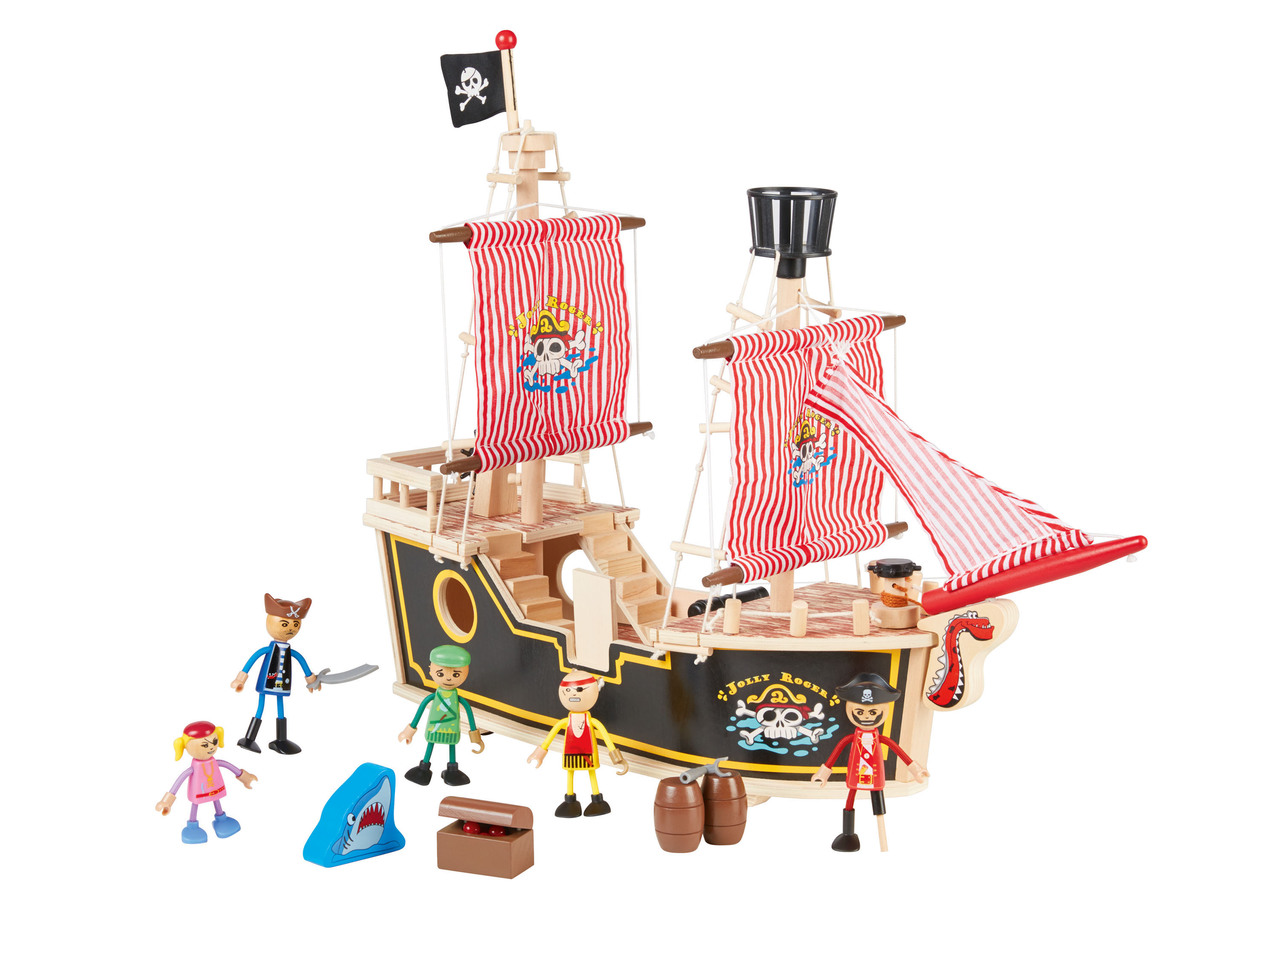 Wooden Doll's House Set or Wooden Pirate Ship Set